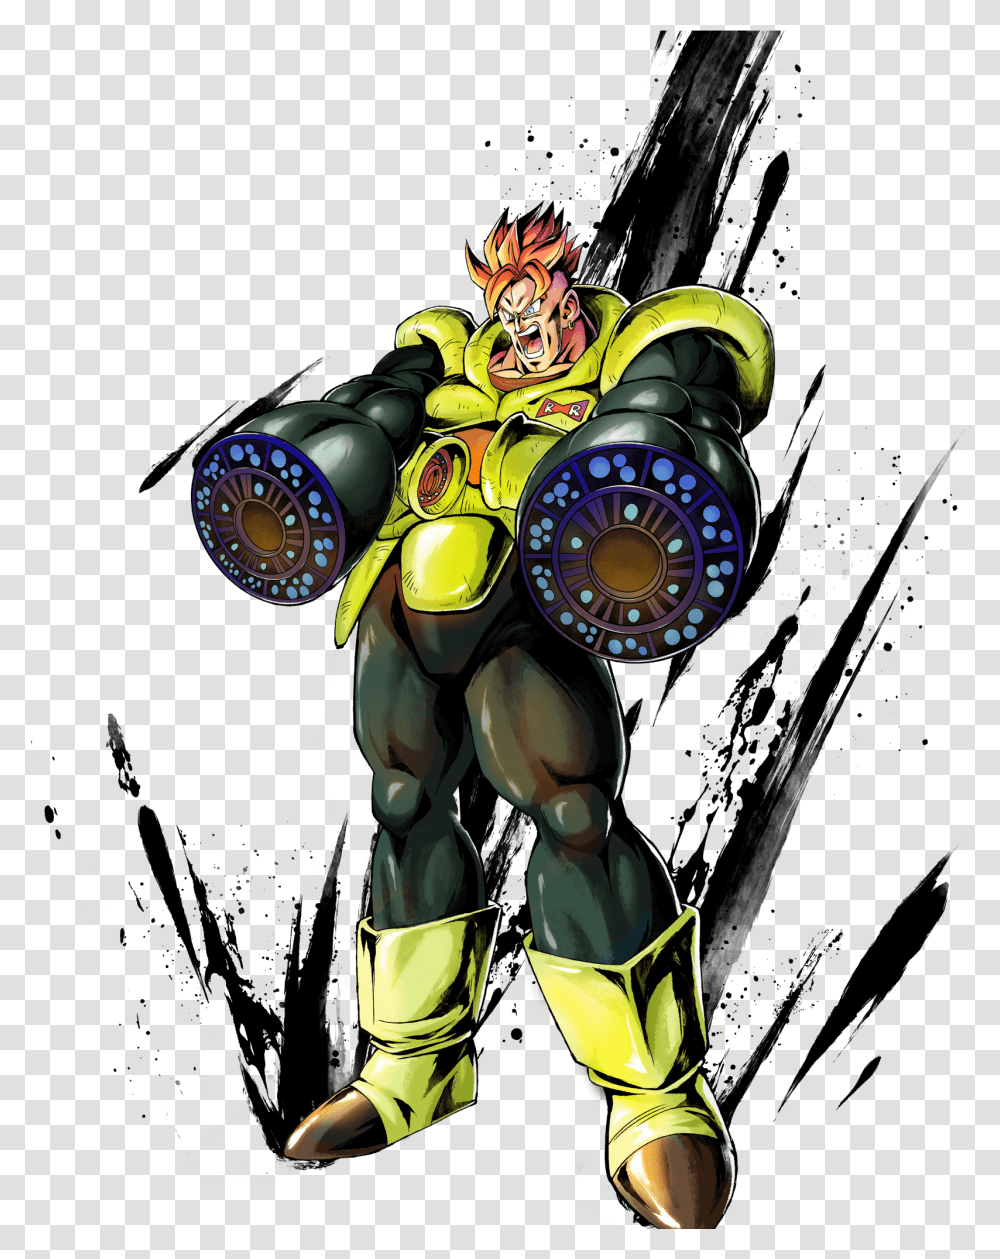 Android 16 Download Dragon Ball Legends, Light, Robot, Clock Tower, Architecture Transparent Png